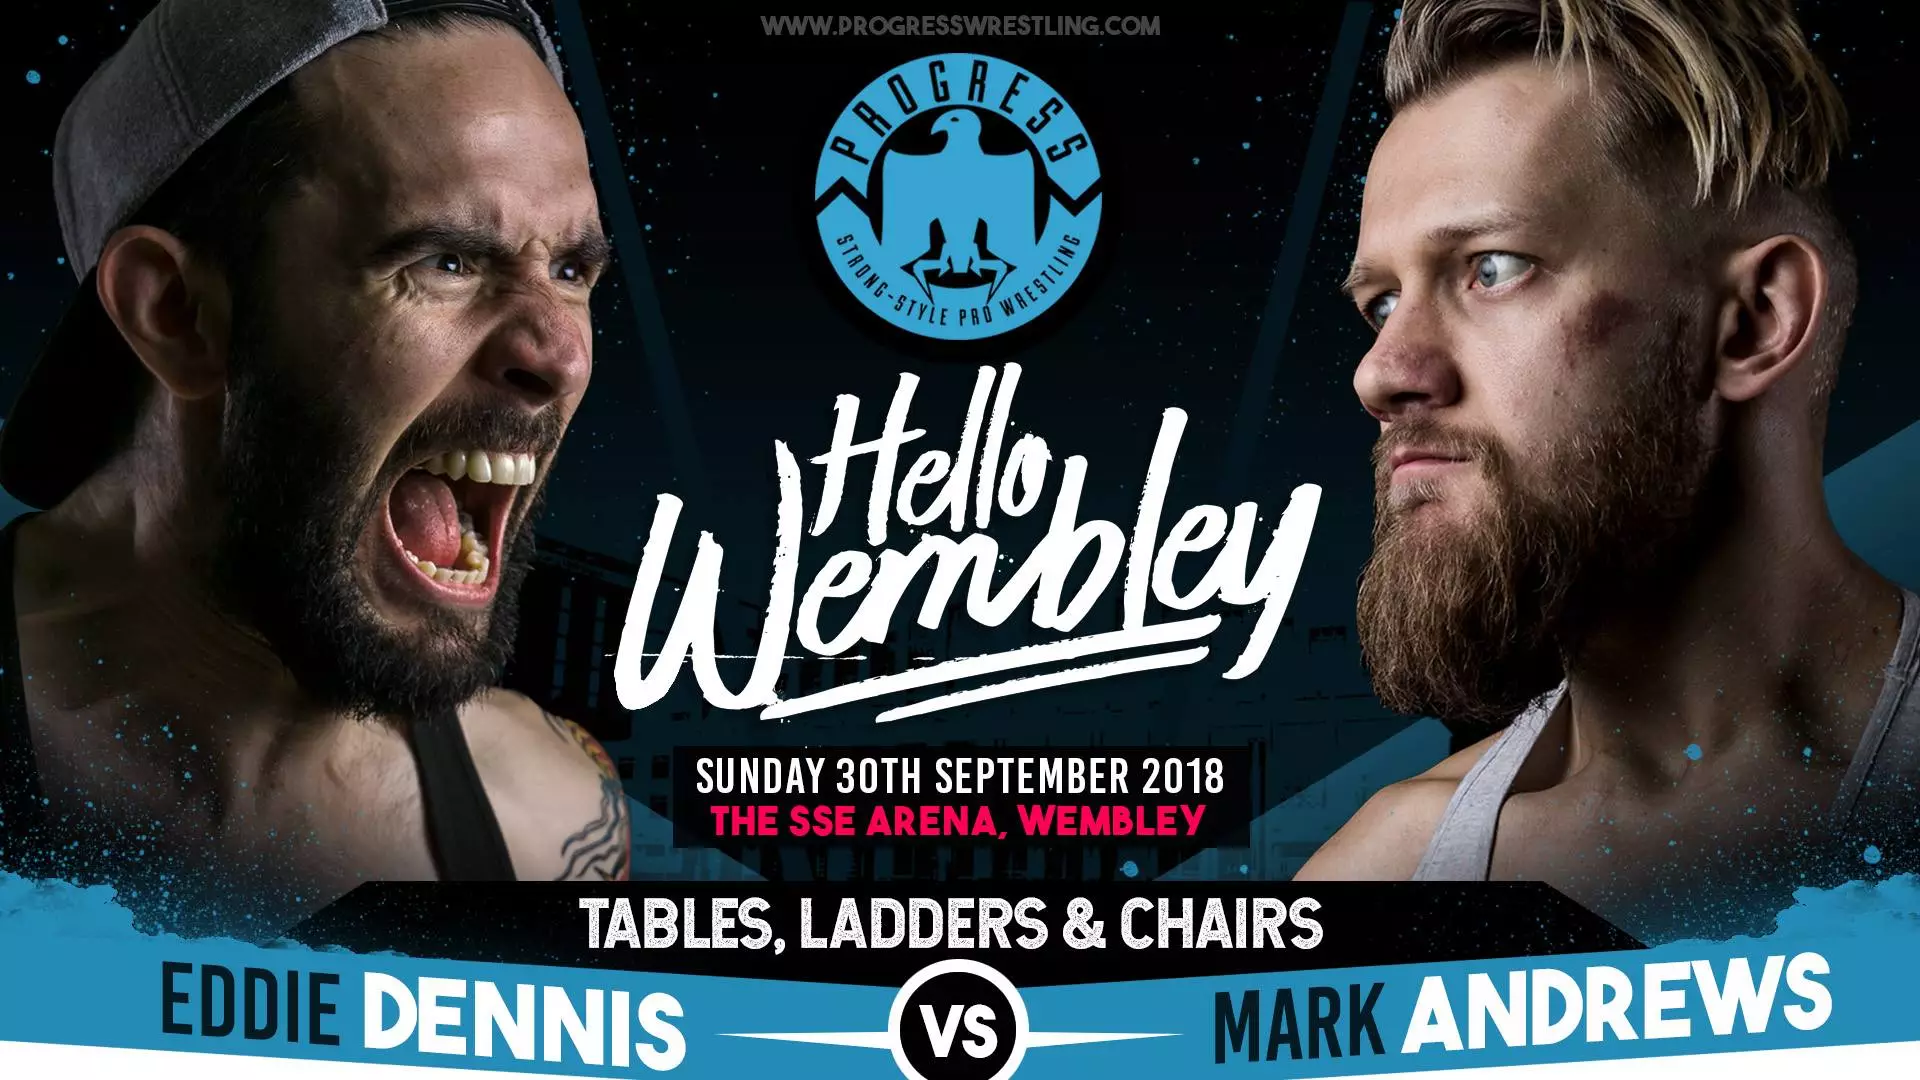 Dennis vs MAndrews is one of the most hotly anticipated matches of the night. Image: PROGRESS Wrestling